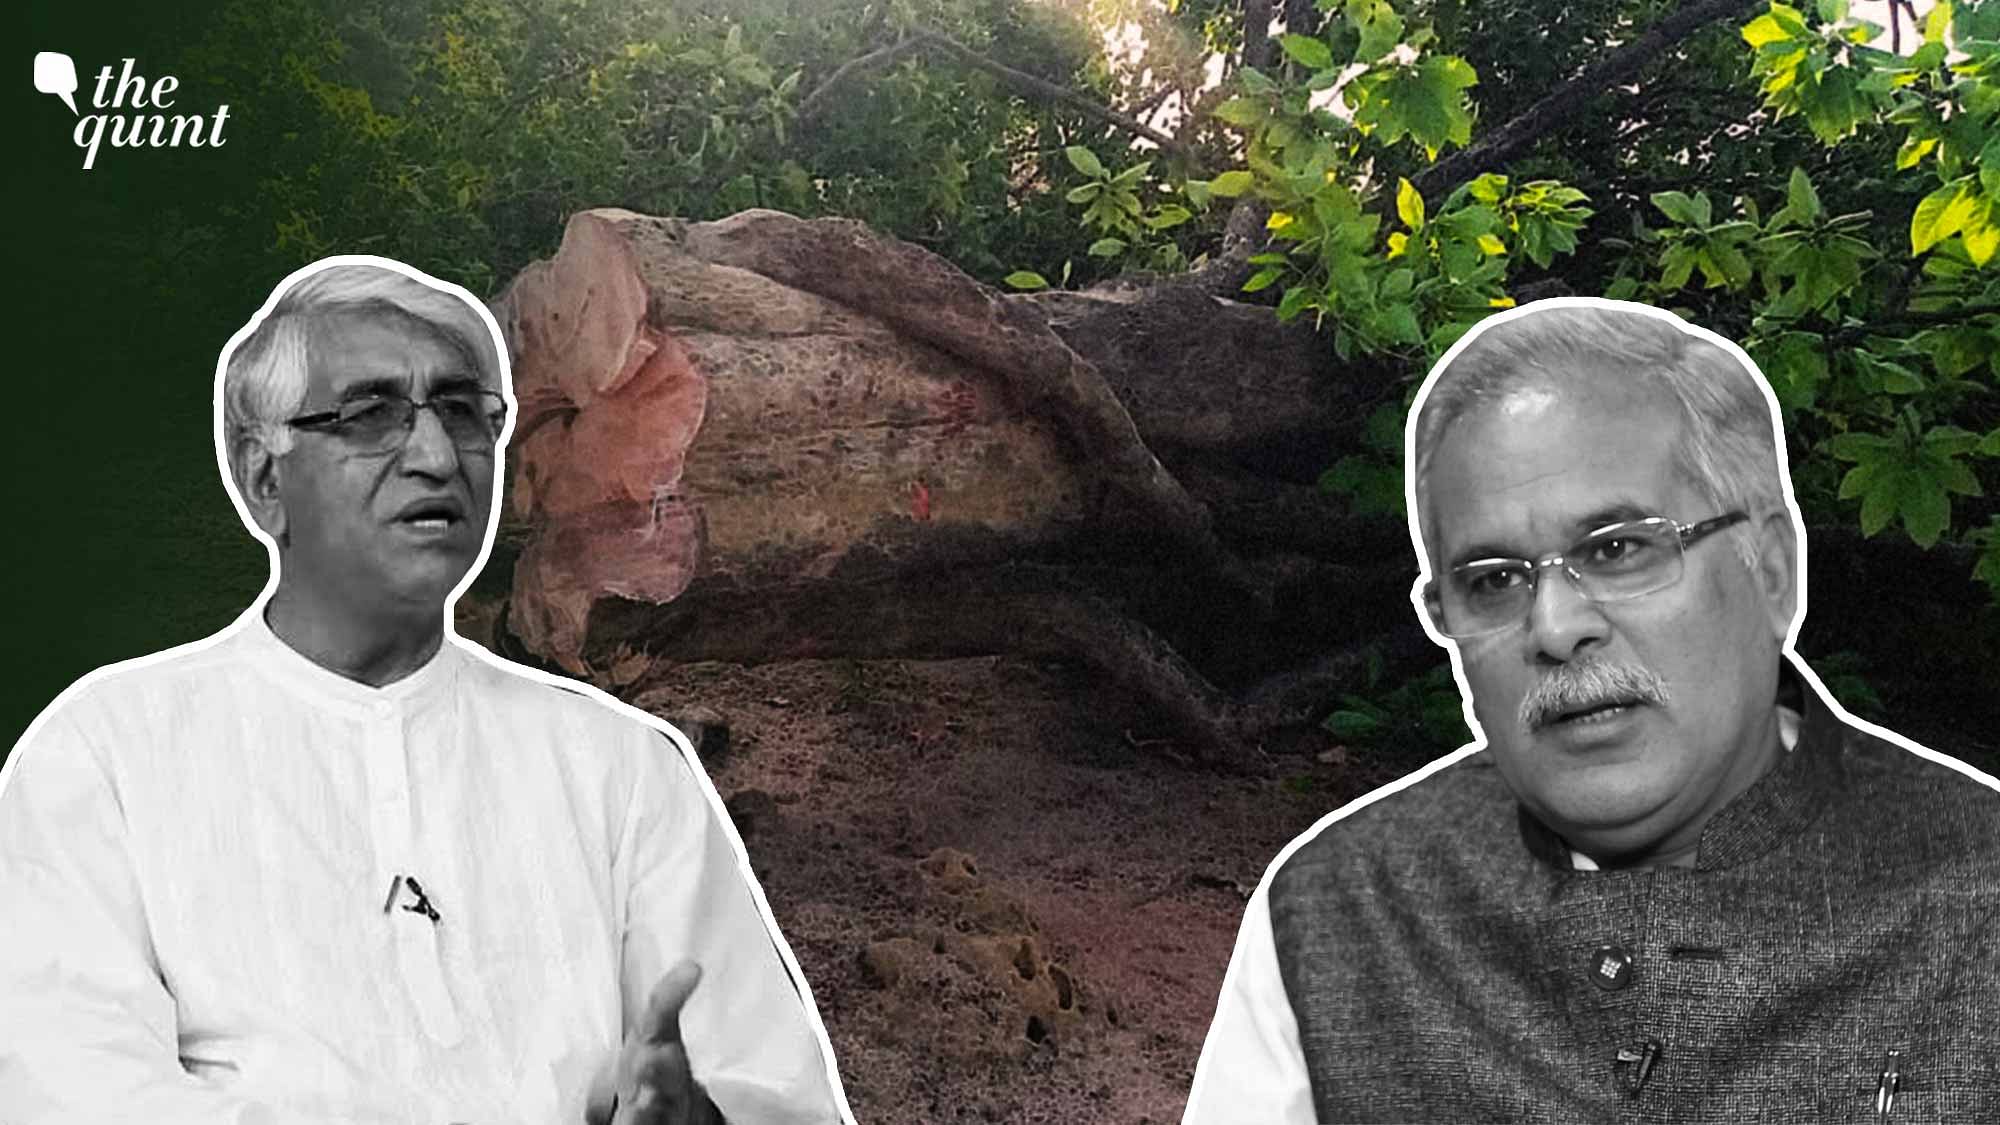 <div class="paragraphs"><p>Bhupesh Baghel has backed up TS Singhdeo, saying no tree will be cut down if the latter doesn't approve. The remarks came a day after Singhdeo met with tribals opposing coal mining in Chhatisgarh's Hasdeo forest.</p></div>